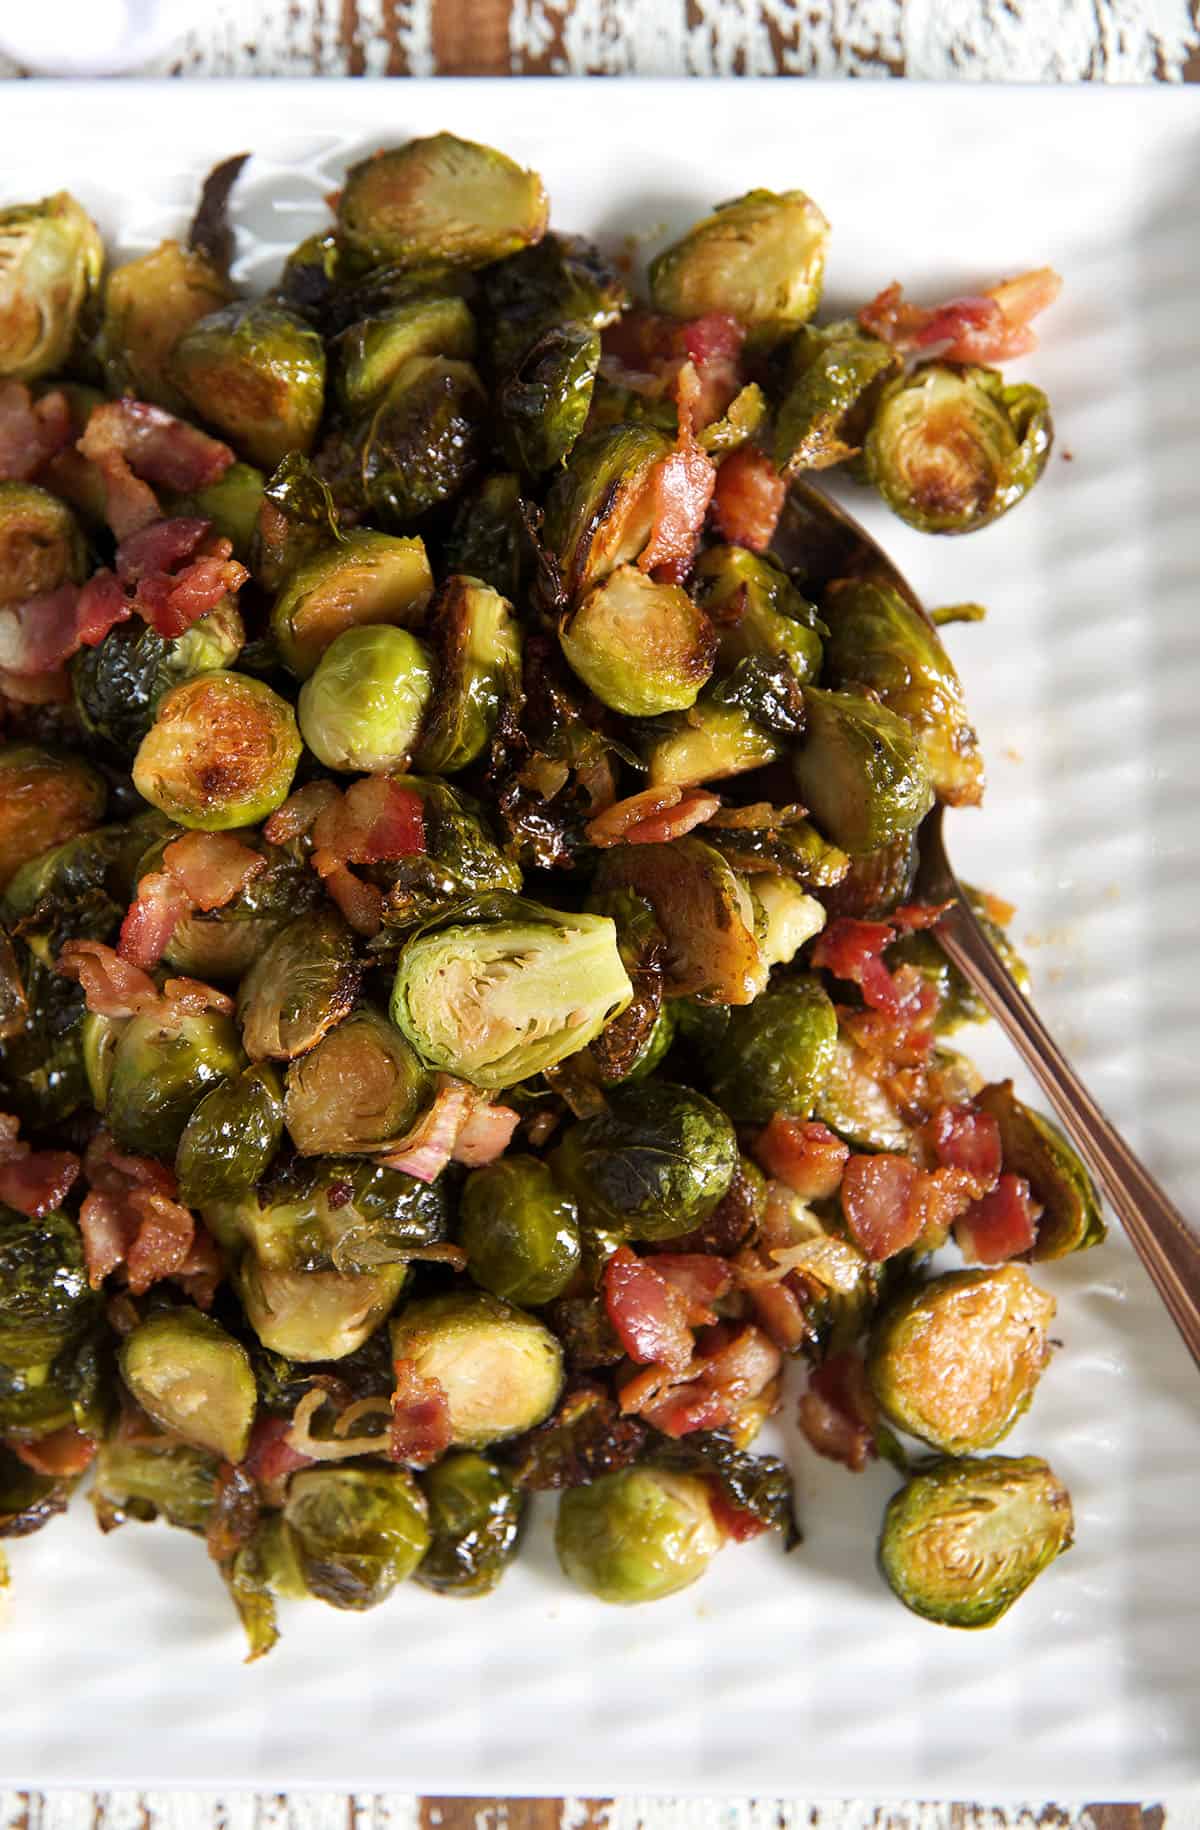 A serving spoon is placed next to a heaping portion of bacon brussel sprouts.